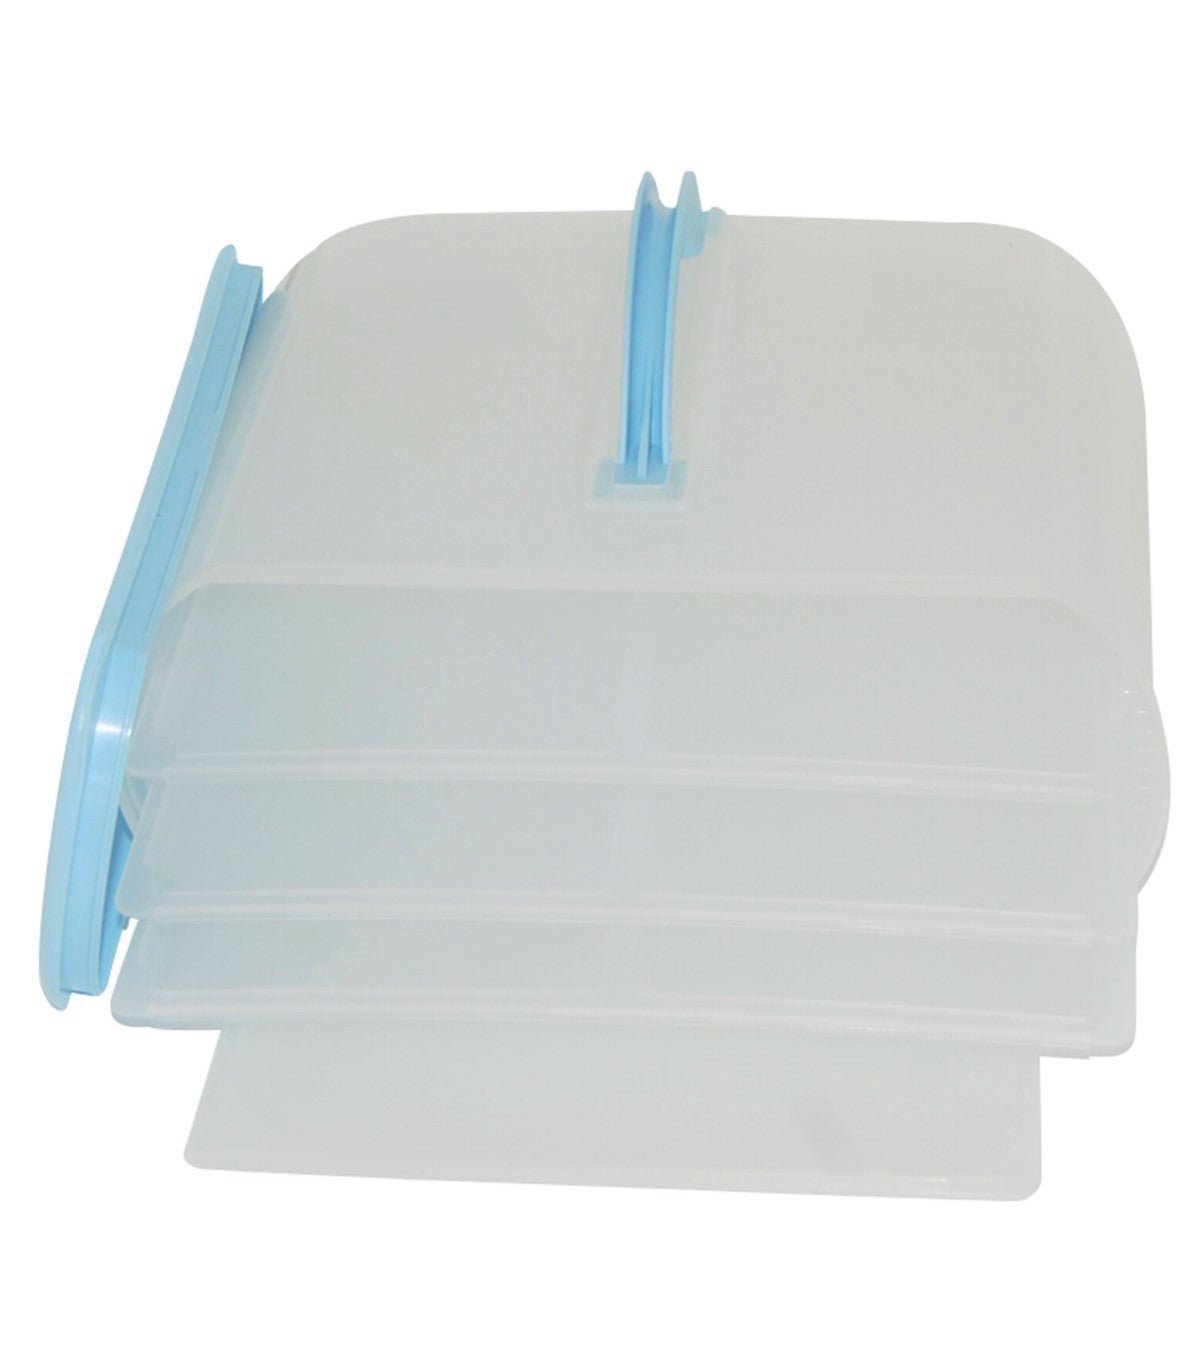 https://www.bakersstongo.com/cdn/shop/products/bakers-sto-n-go-cookie-carrier-compact-size-778454_2048x.jpg?v=1704319974